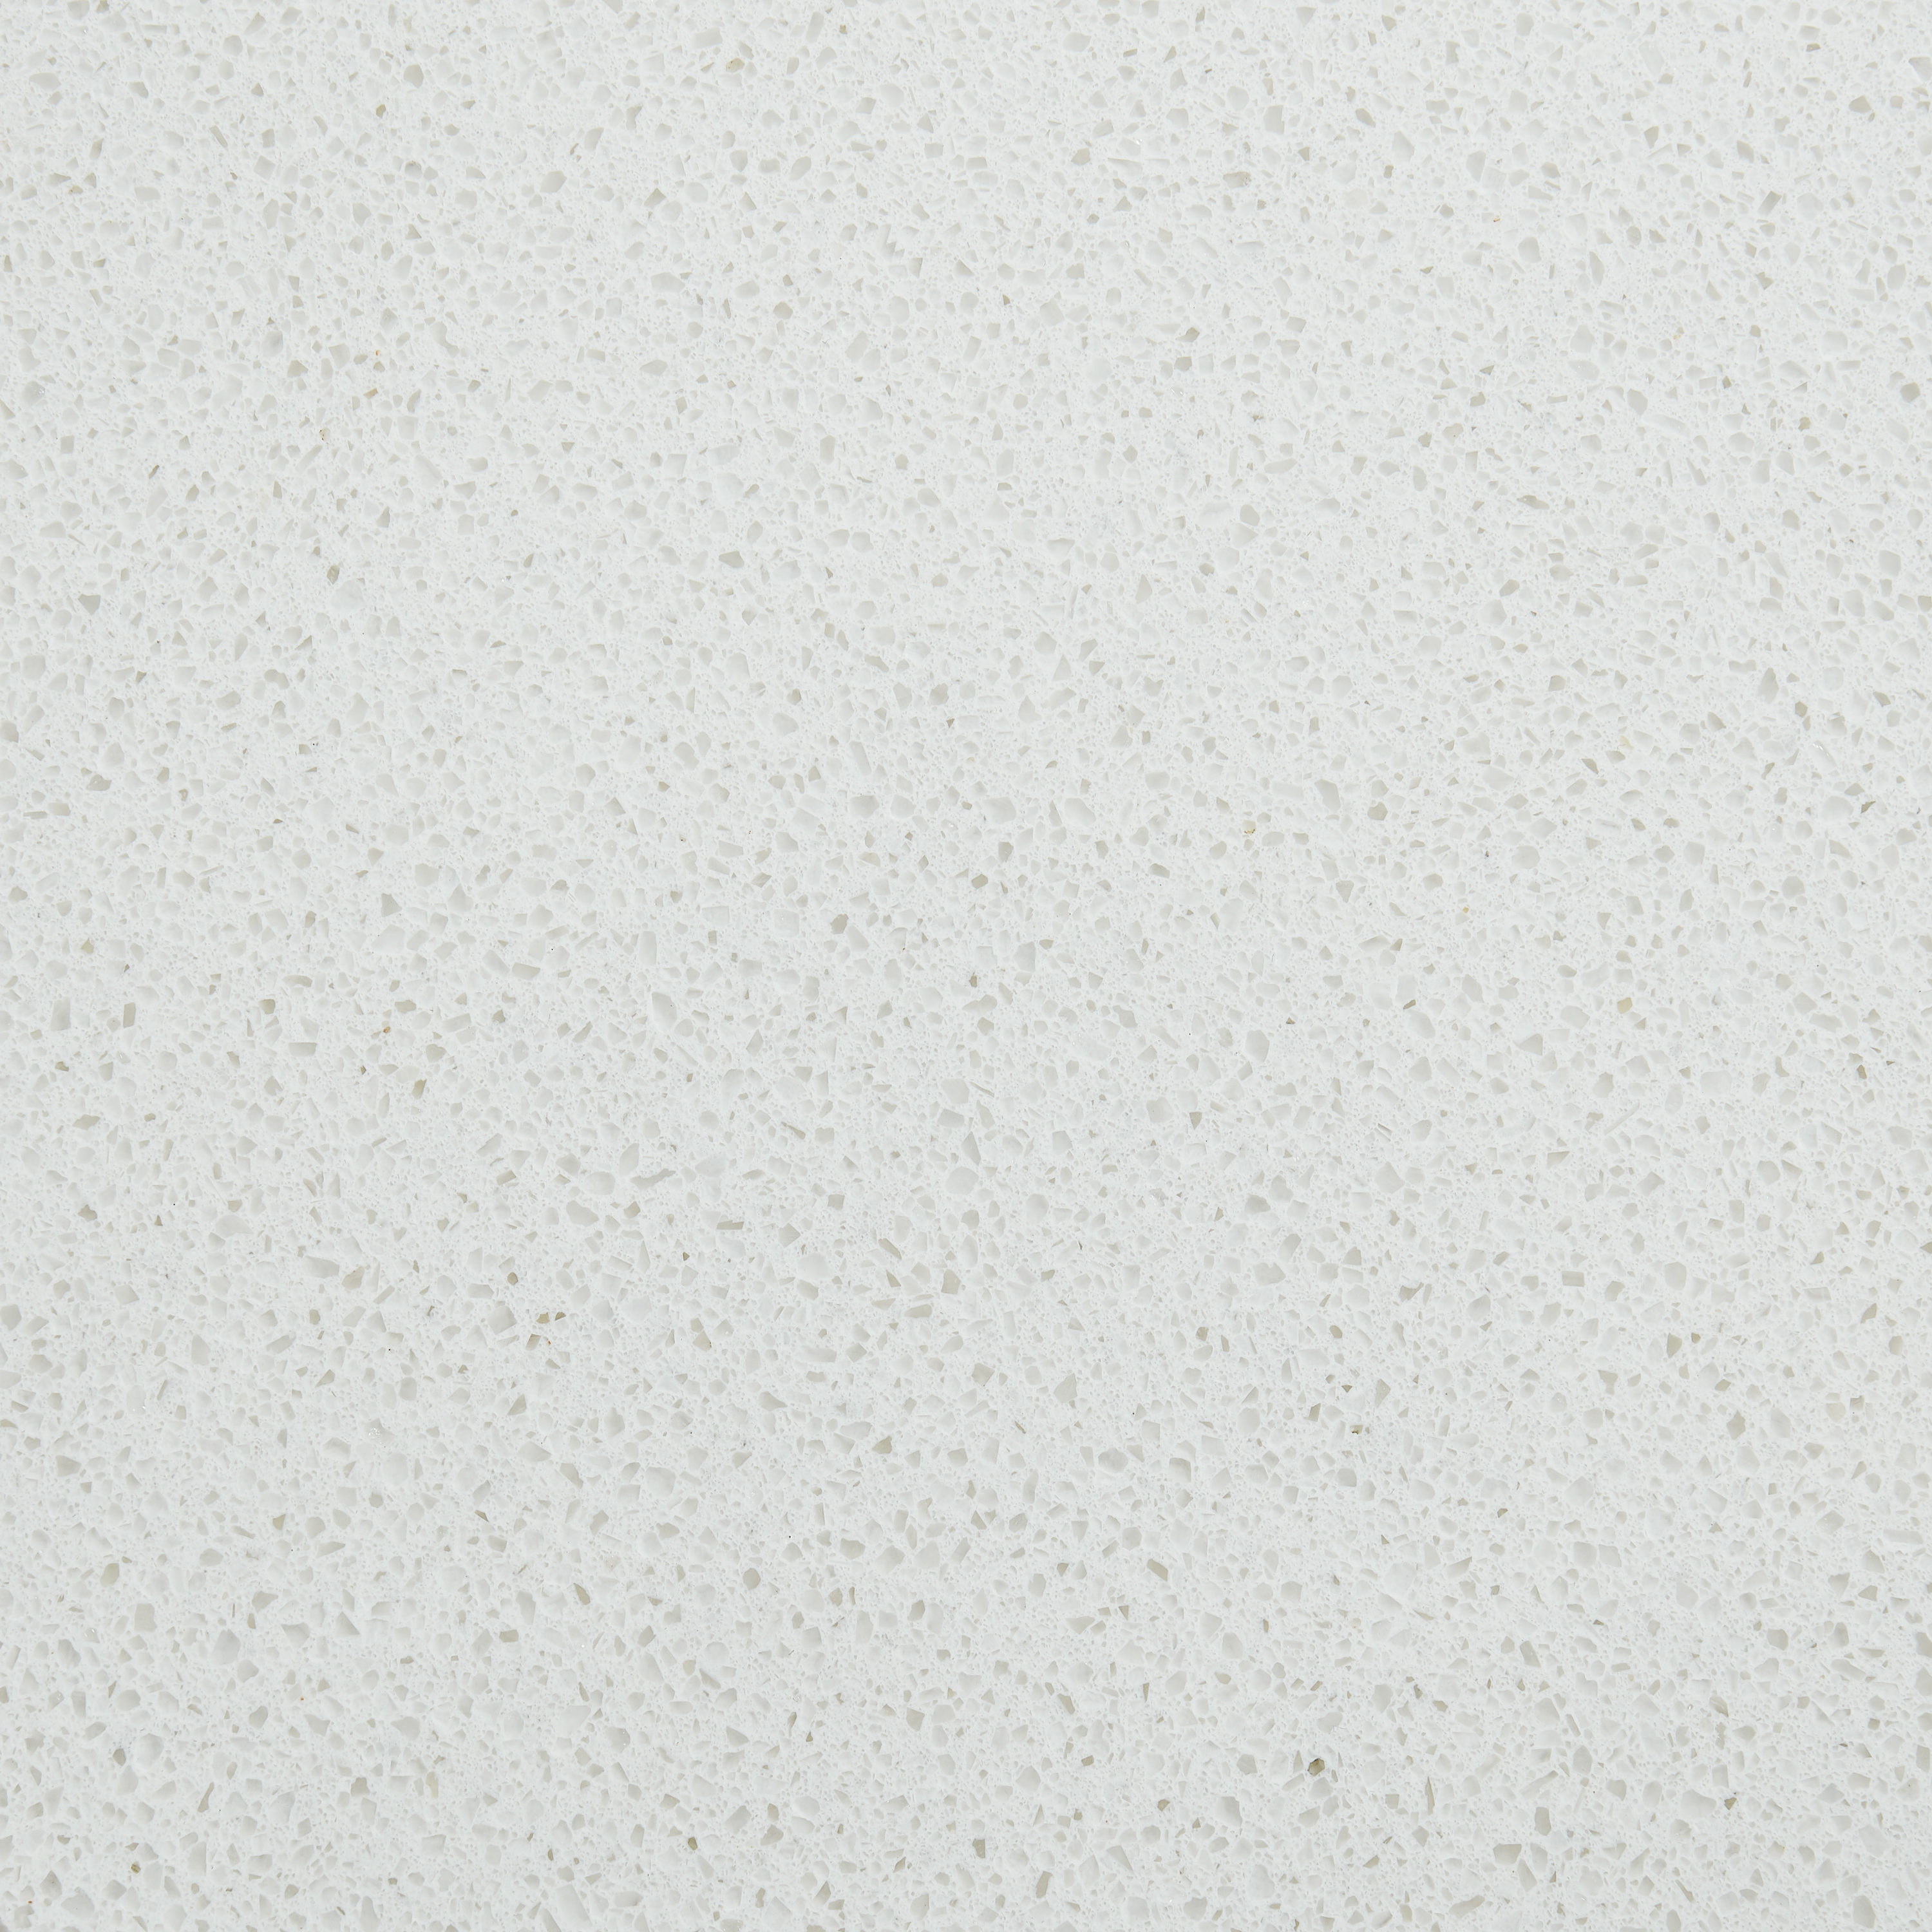 allen + roth Meridian 49-in x 22-in White/Polished Engineered Marble ...